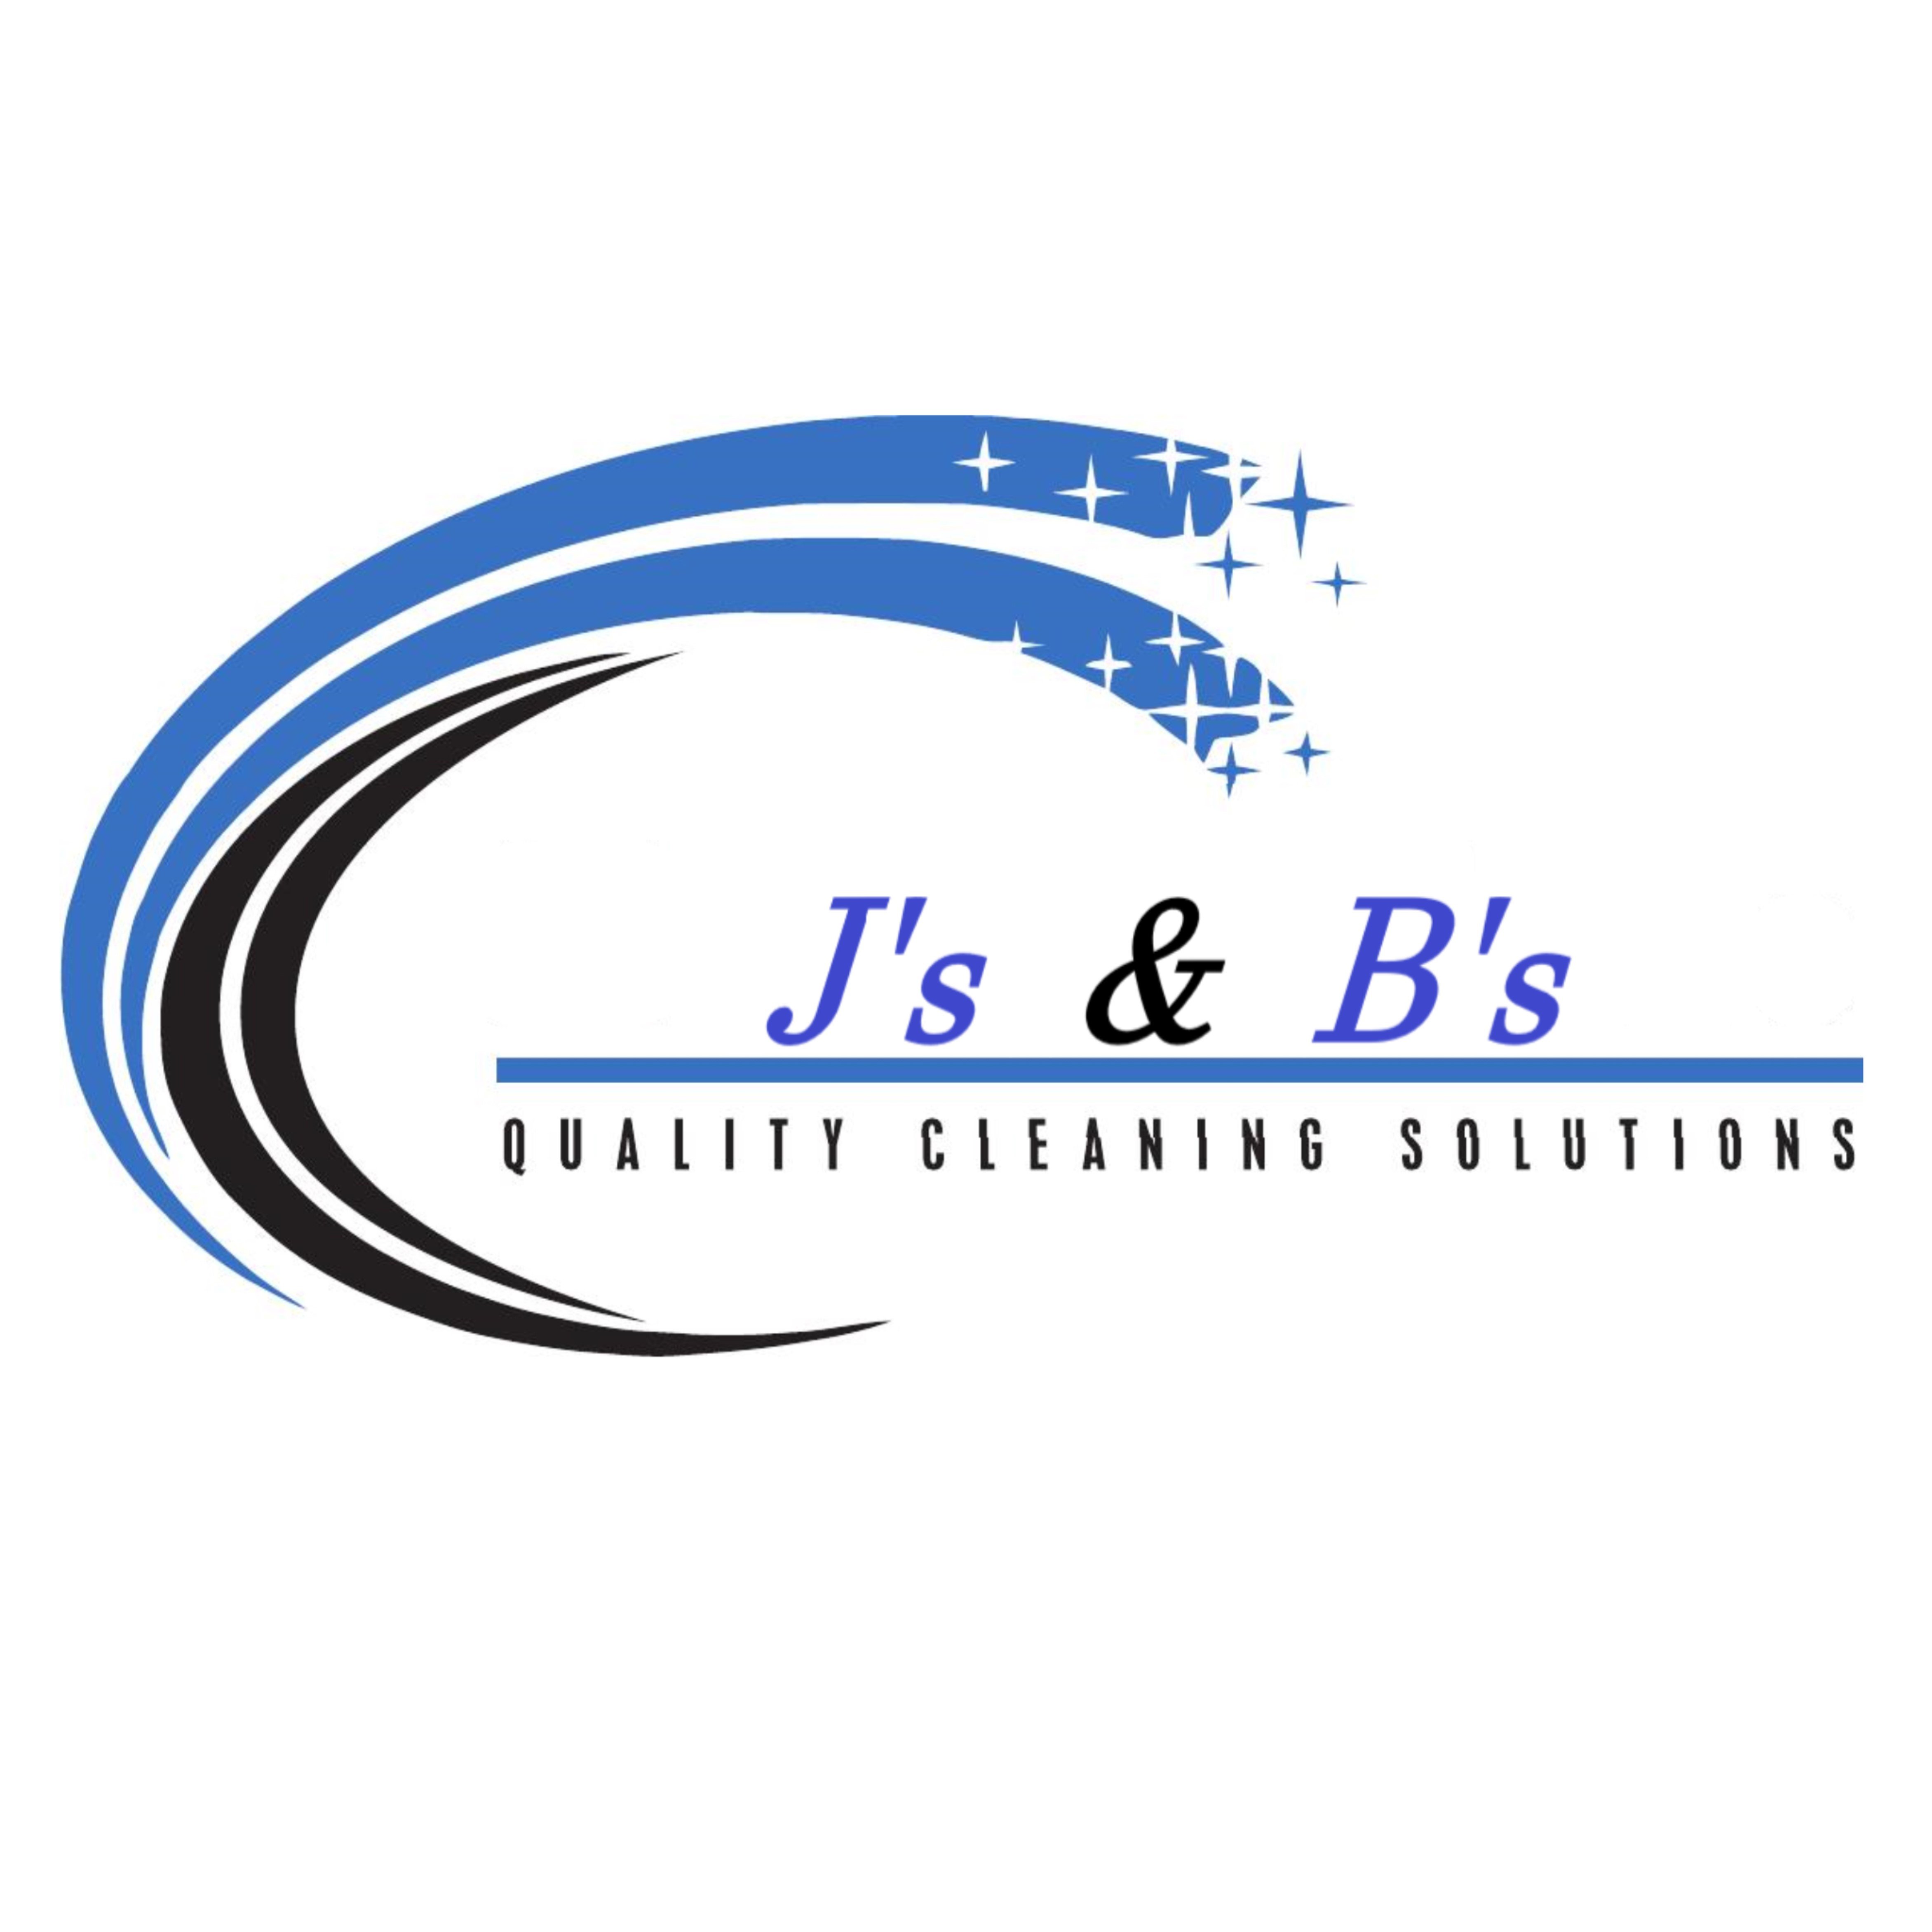 J's & B's Quality Cleaning Solutions Logo